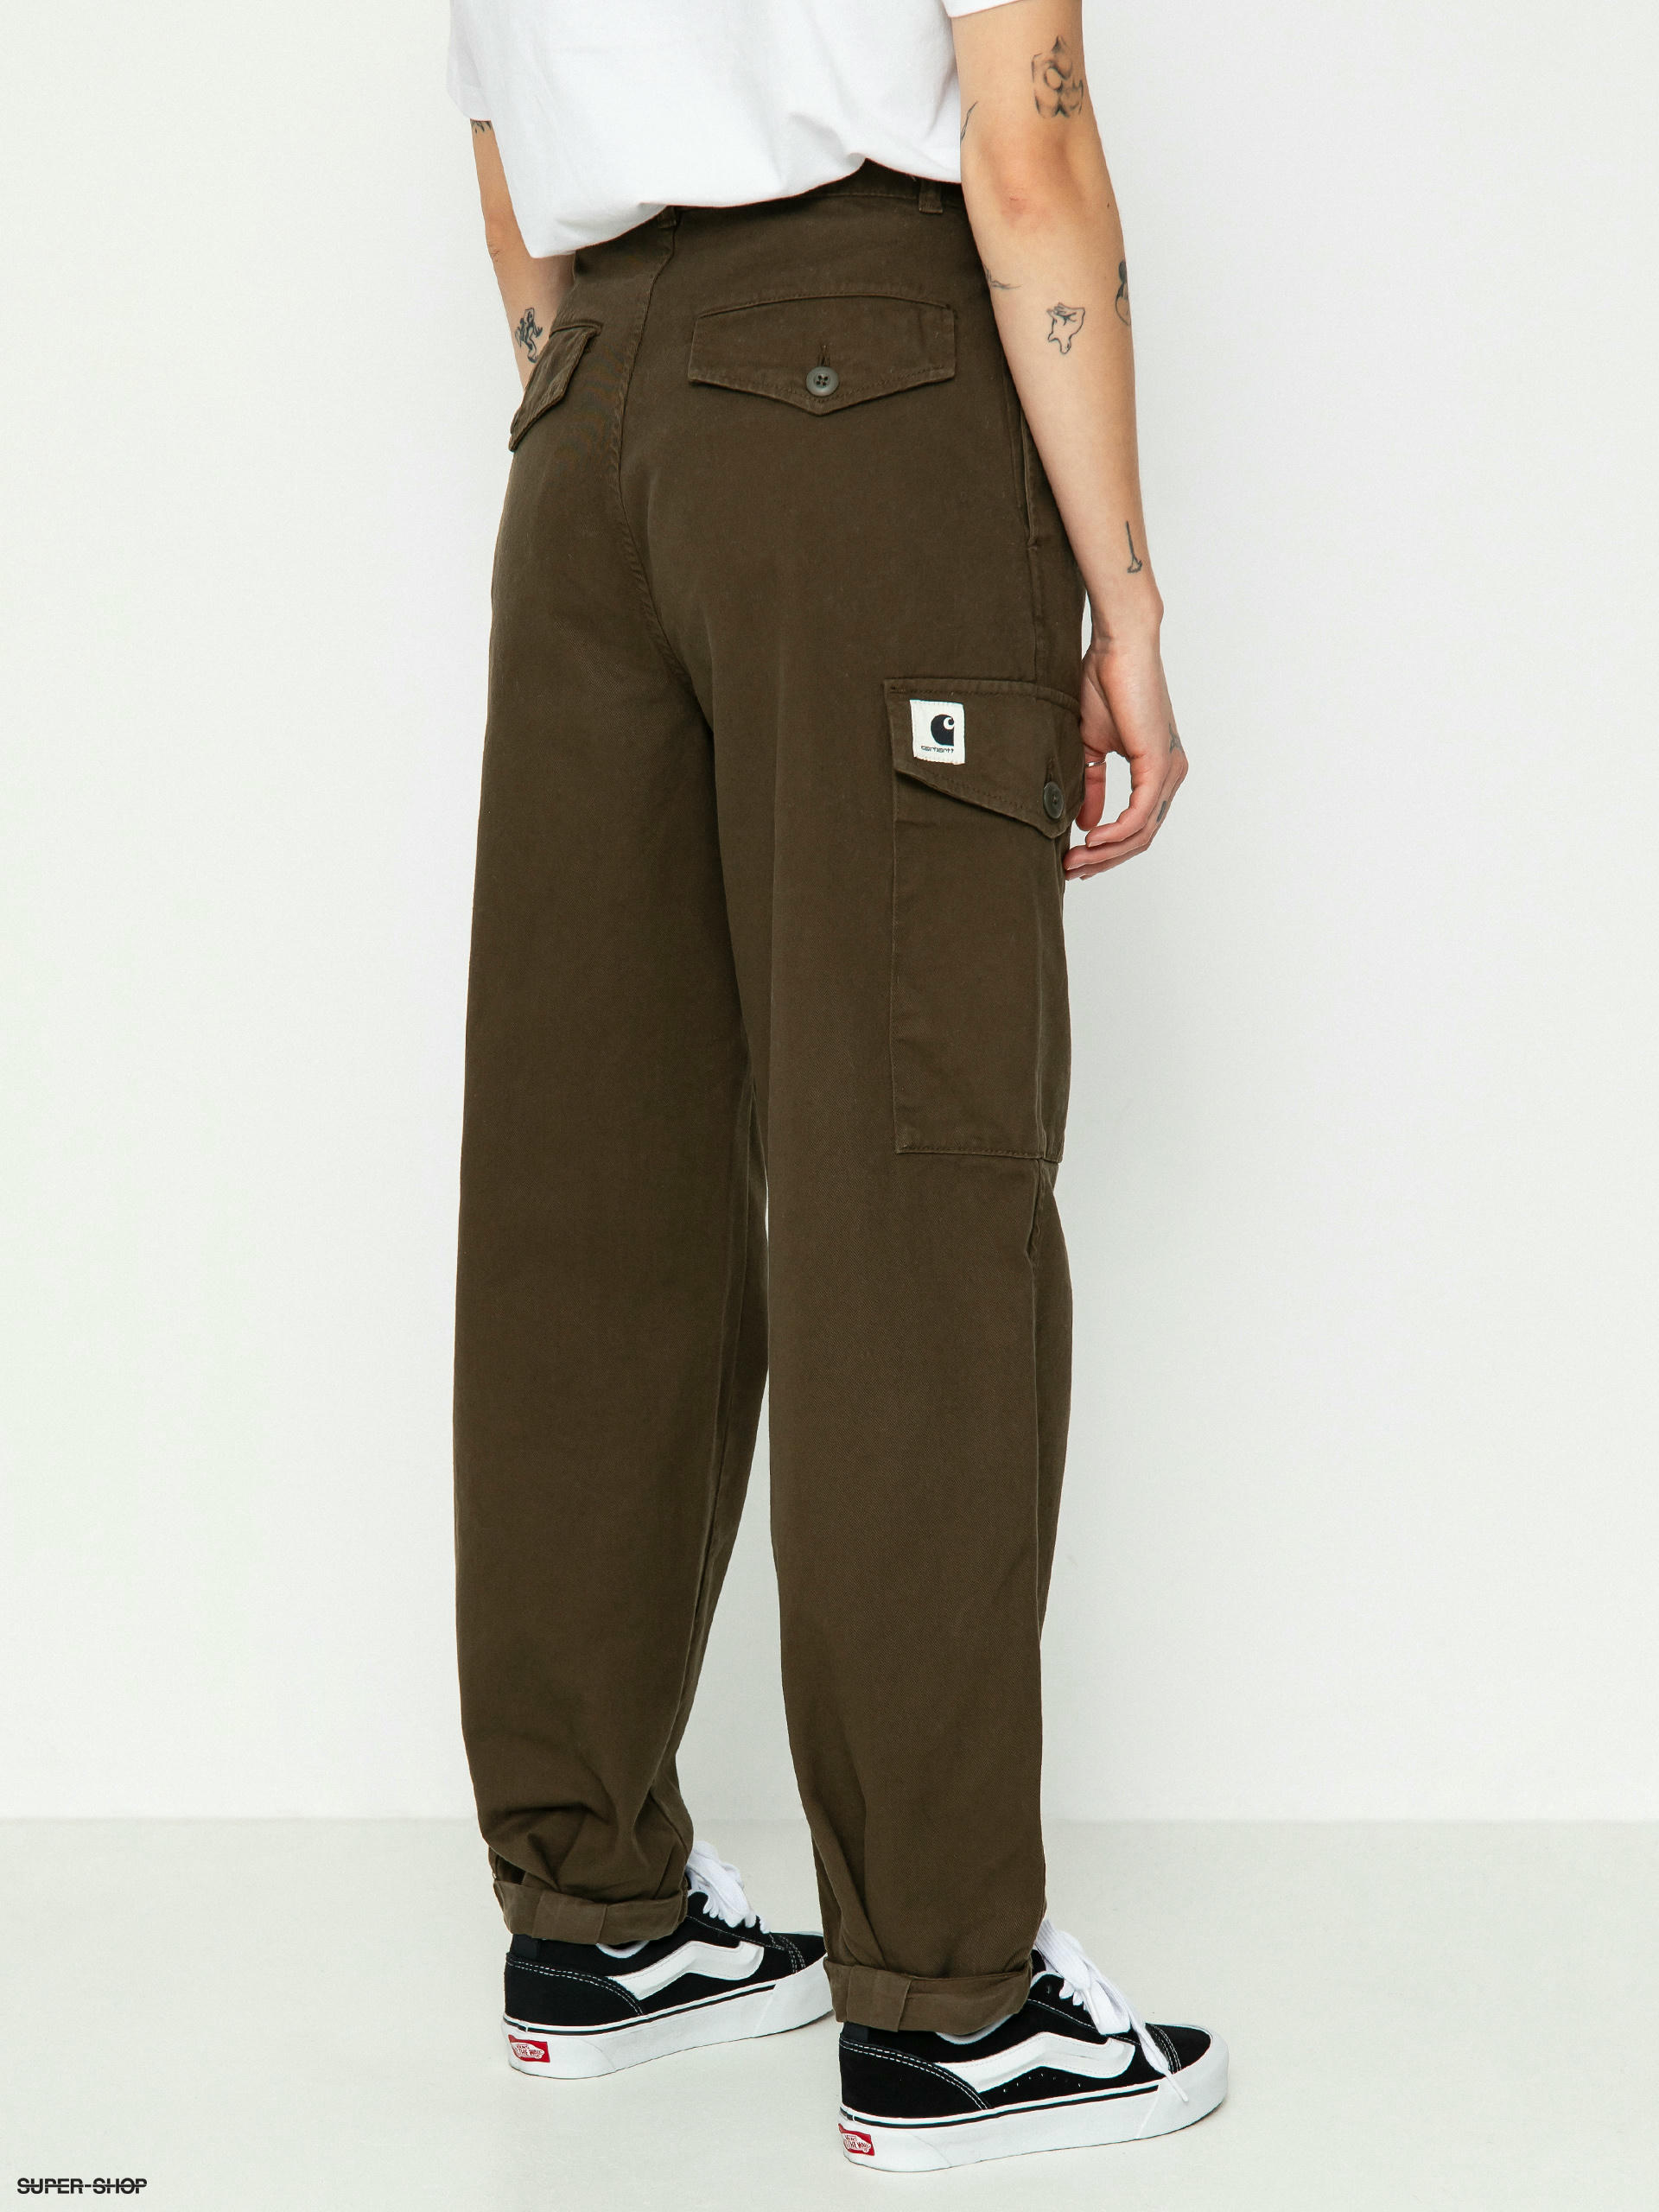 Carhartt Wip Wmns Collins Pant Brown - Womens - Casual Pants